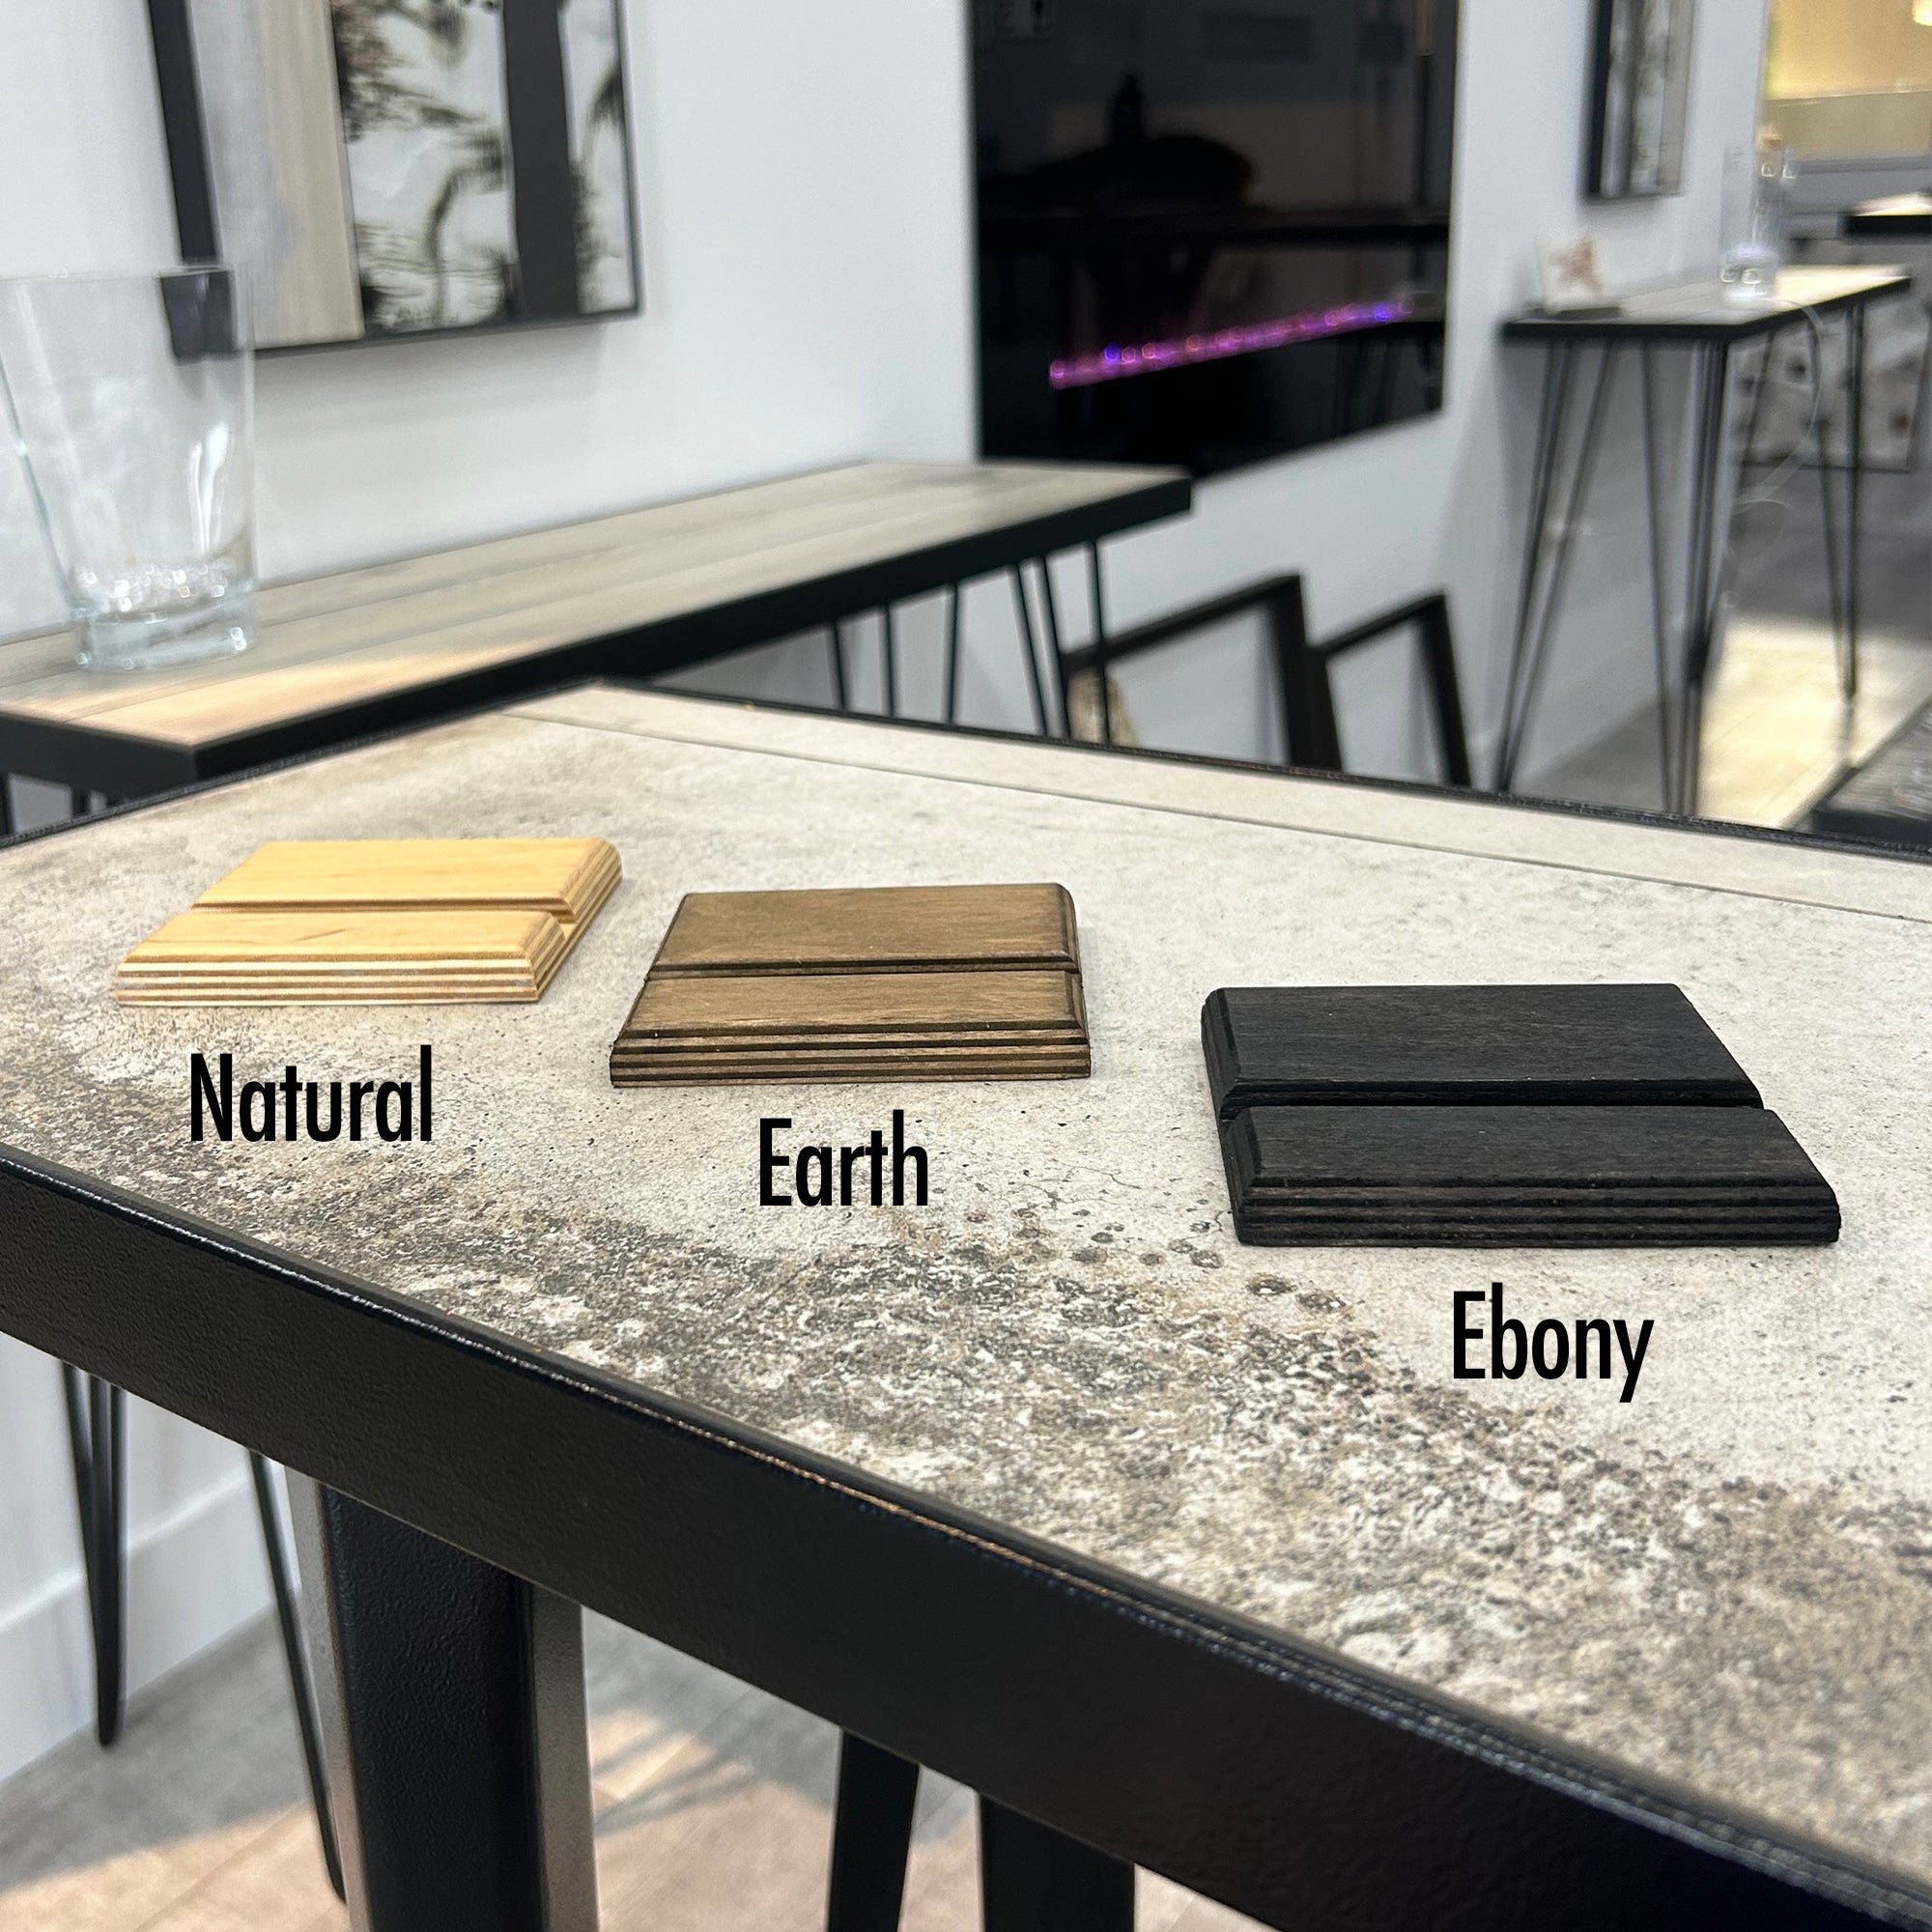 Three color choices of baltic birch stands to display porcelain or baltic birch art tiles